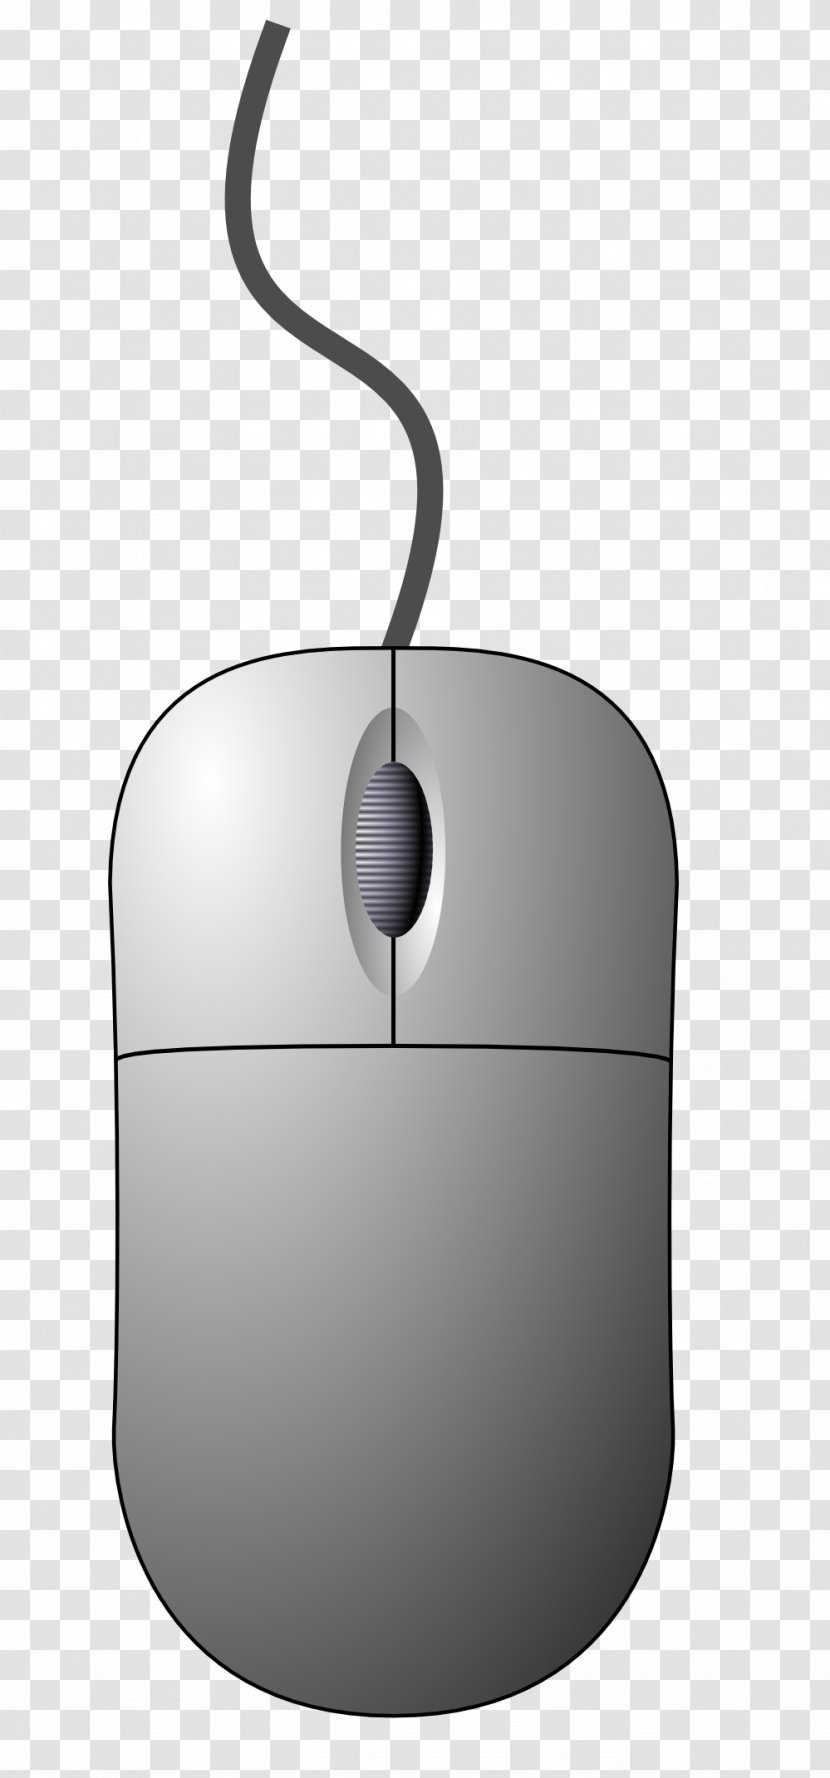 Computer Mouse Keyboard Optical Trackball - Gray - Pc Picture Transparent PNG